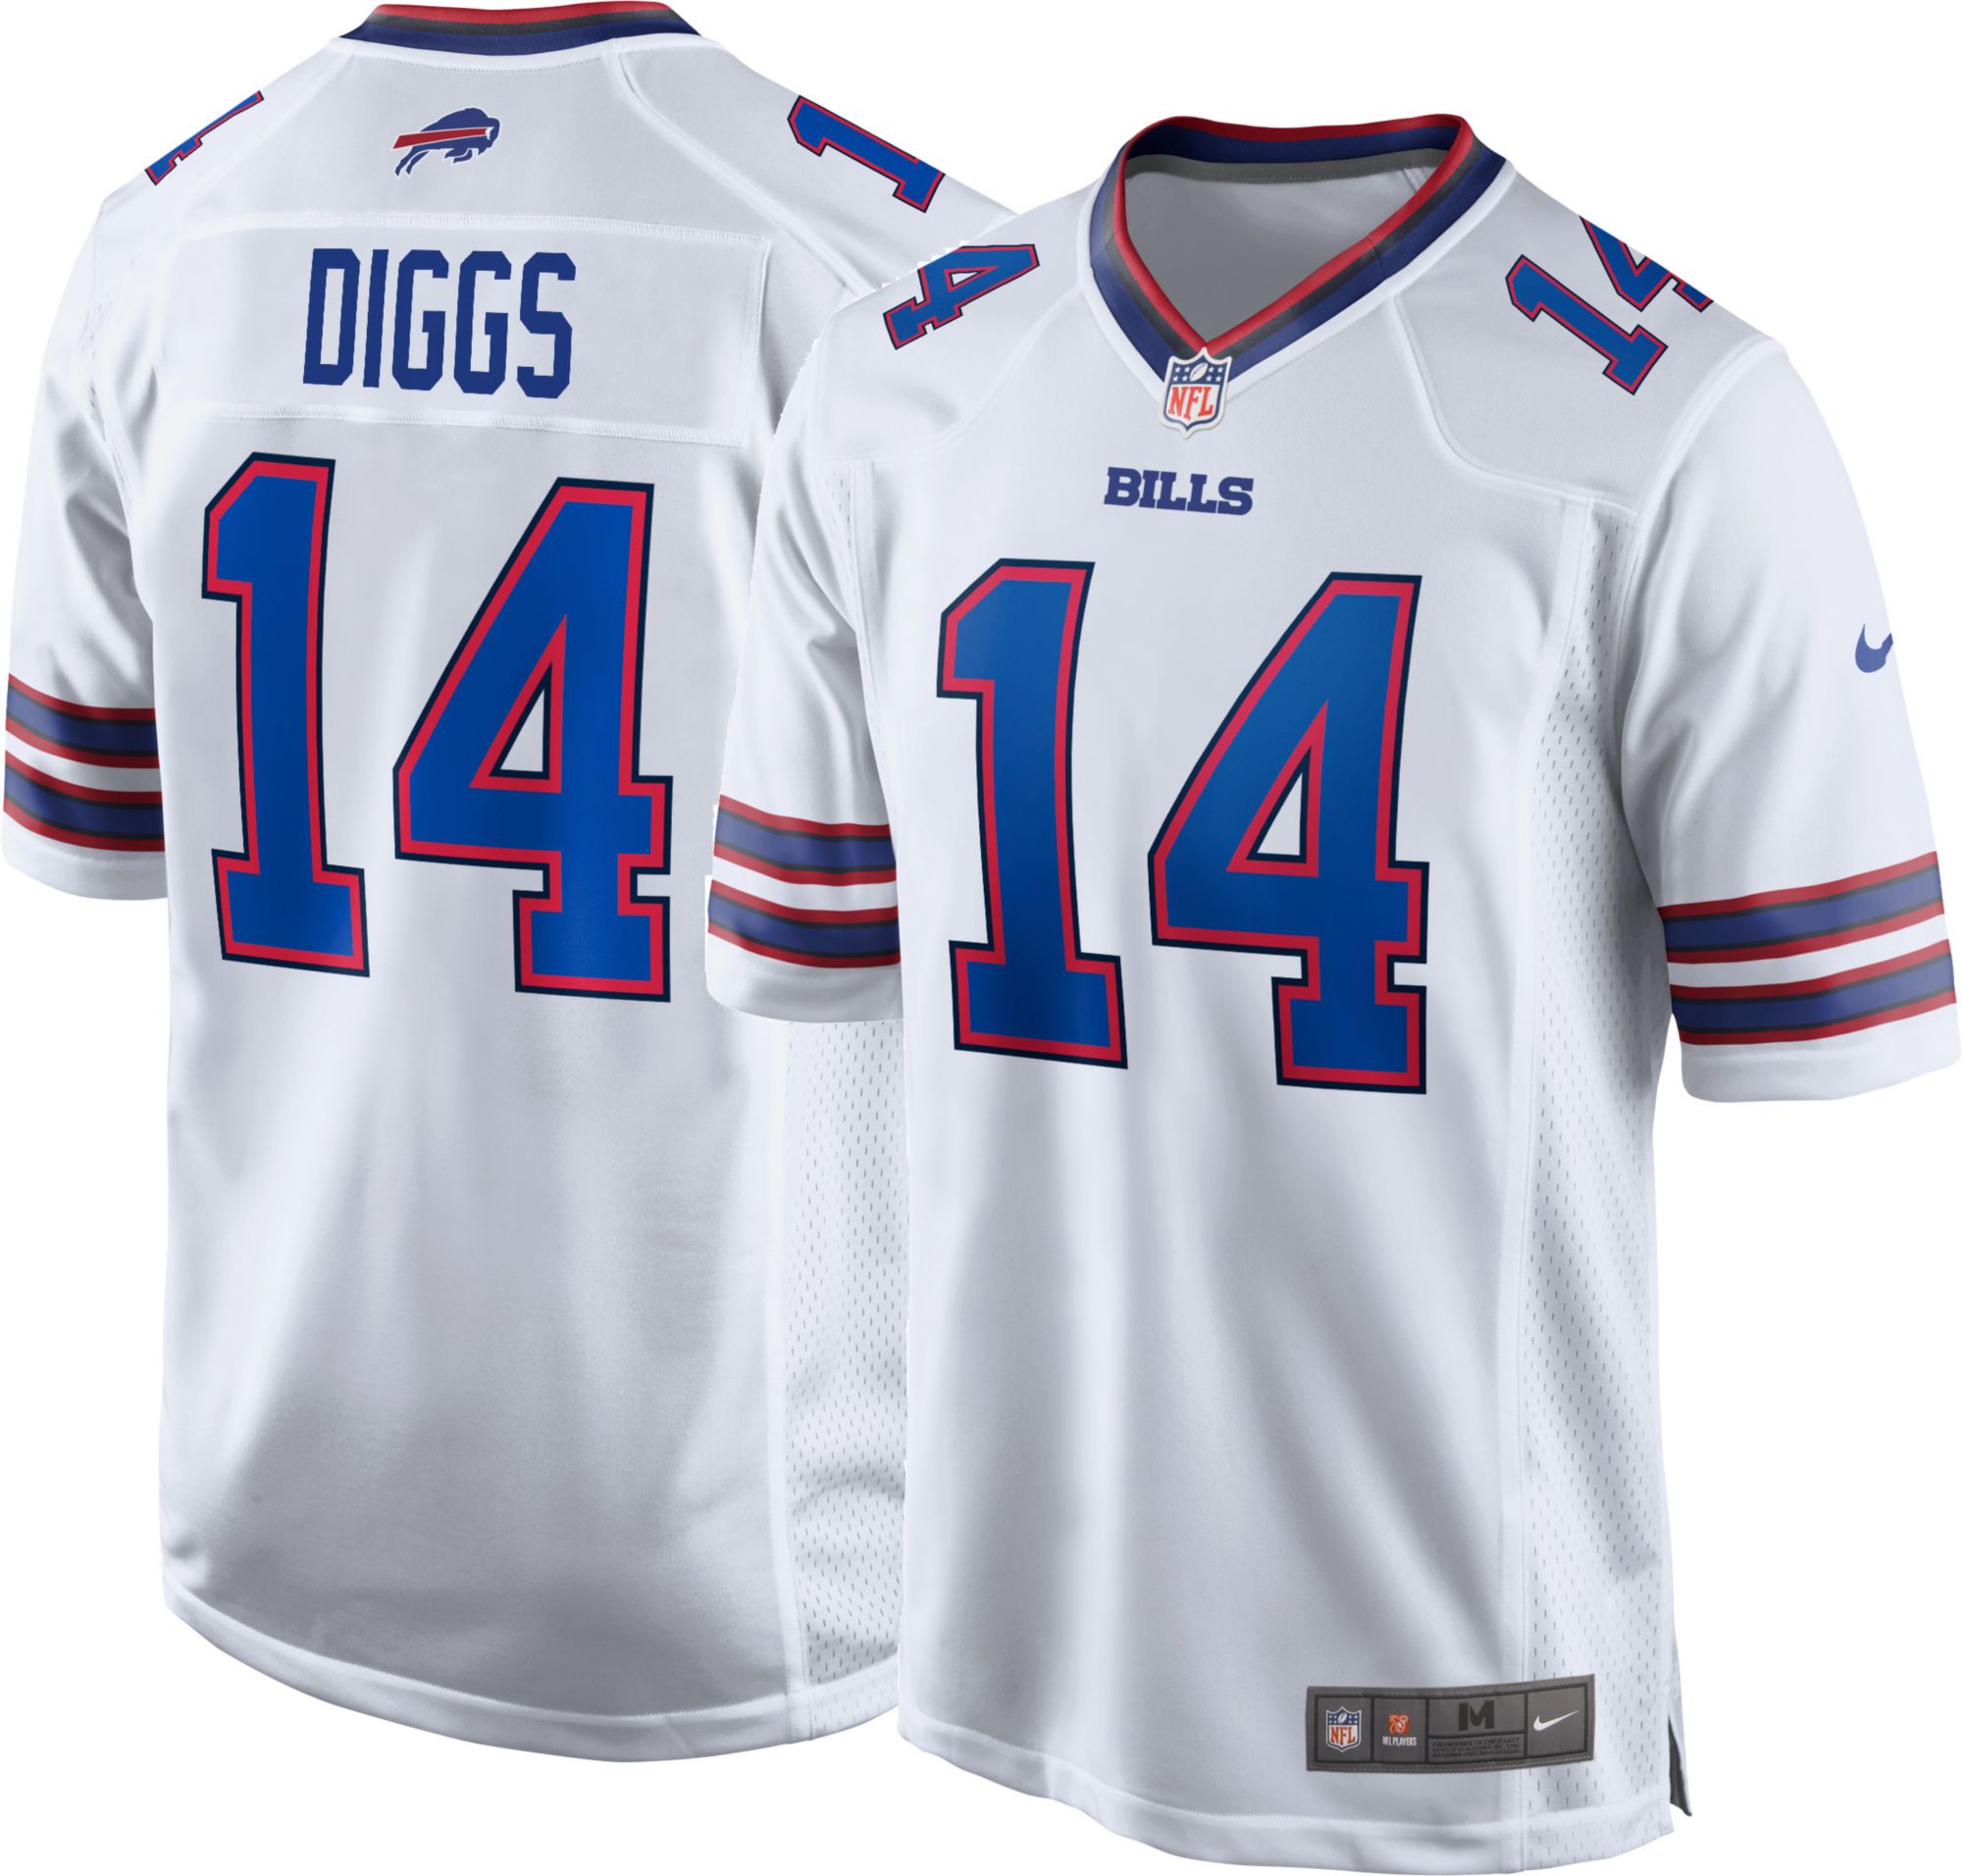 where can i buy official nfl jerseys